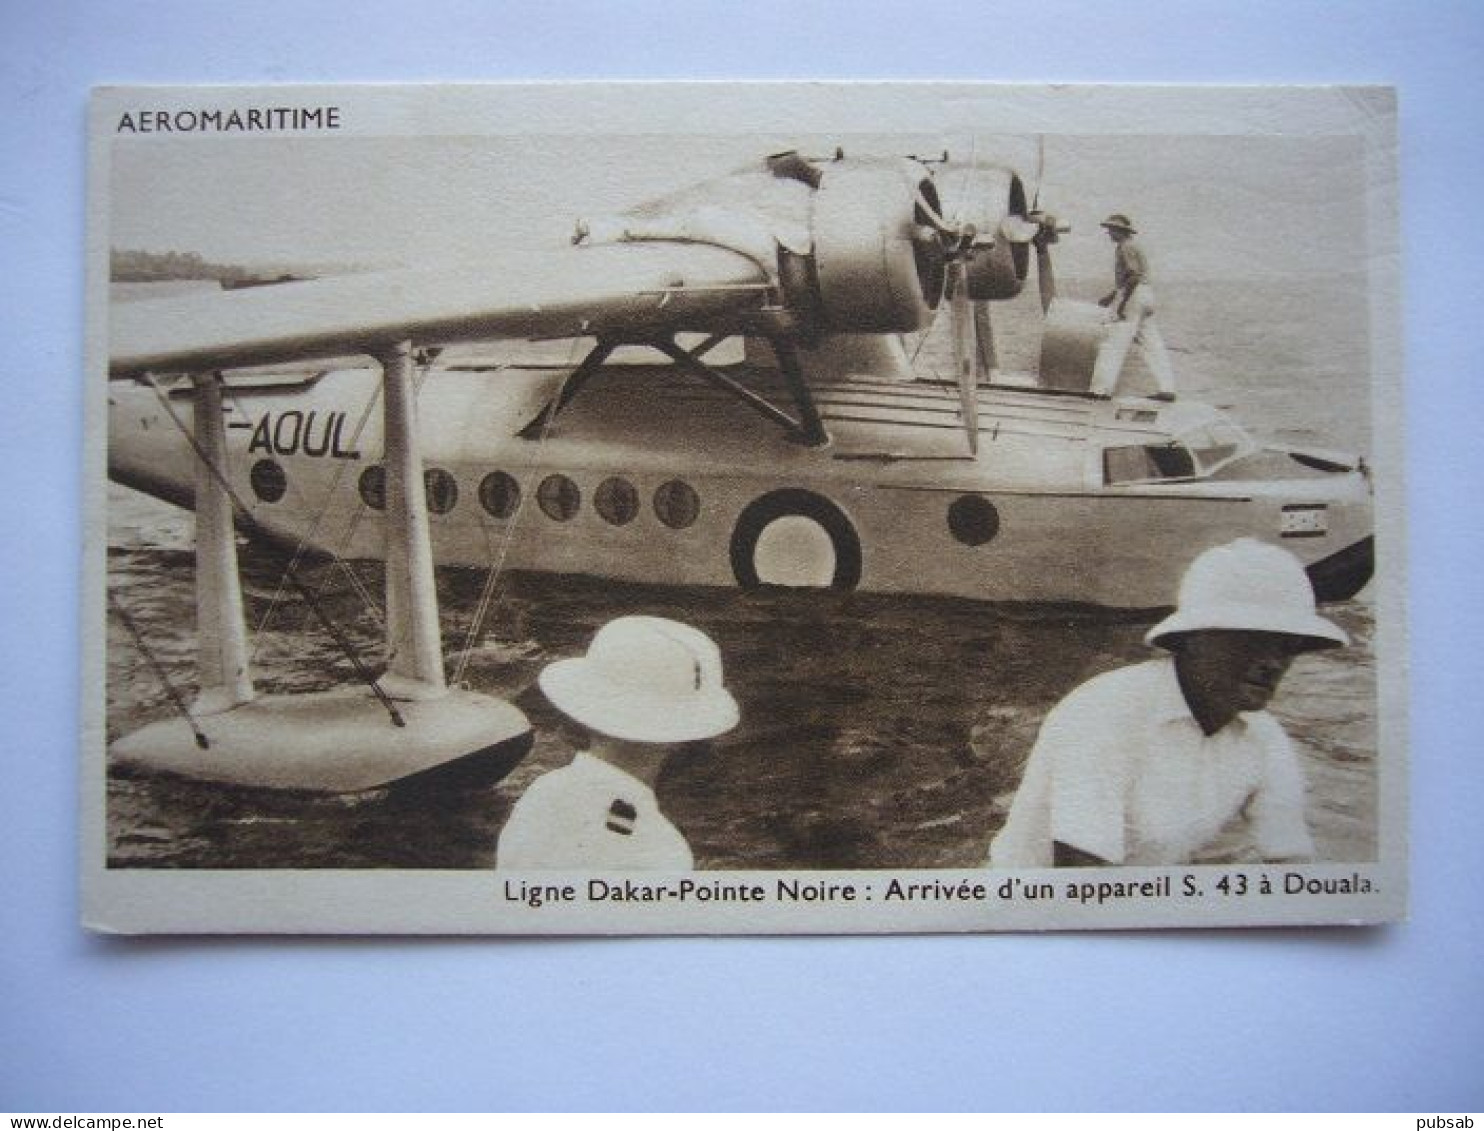 Avion / Airplane /  AEROMARITIME / Sea Plane / Sikorsky S.43 / Airline Issue - 1919-1938: Entre Guerres